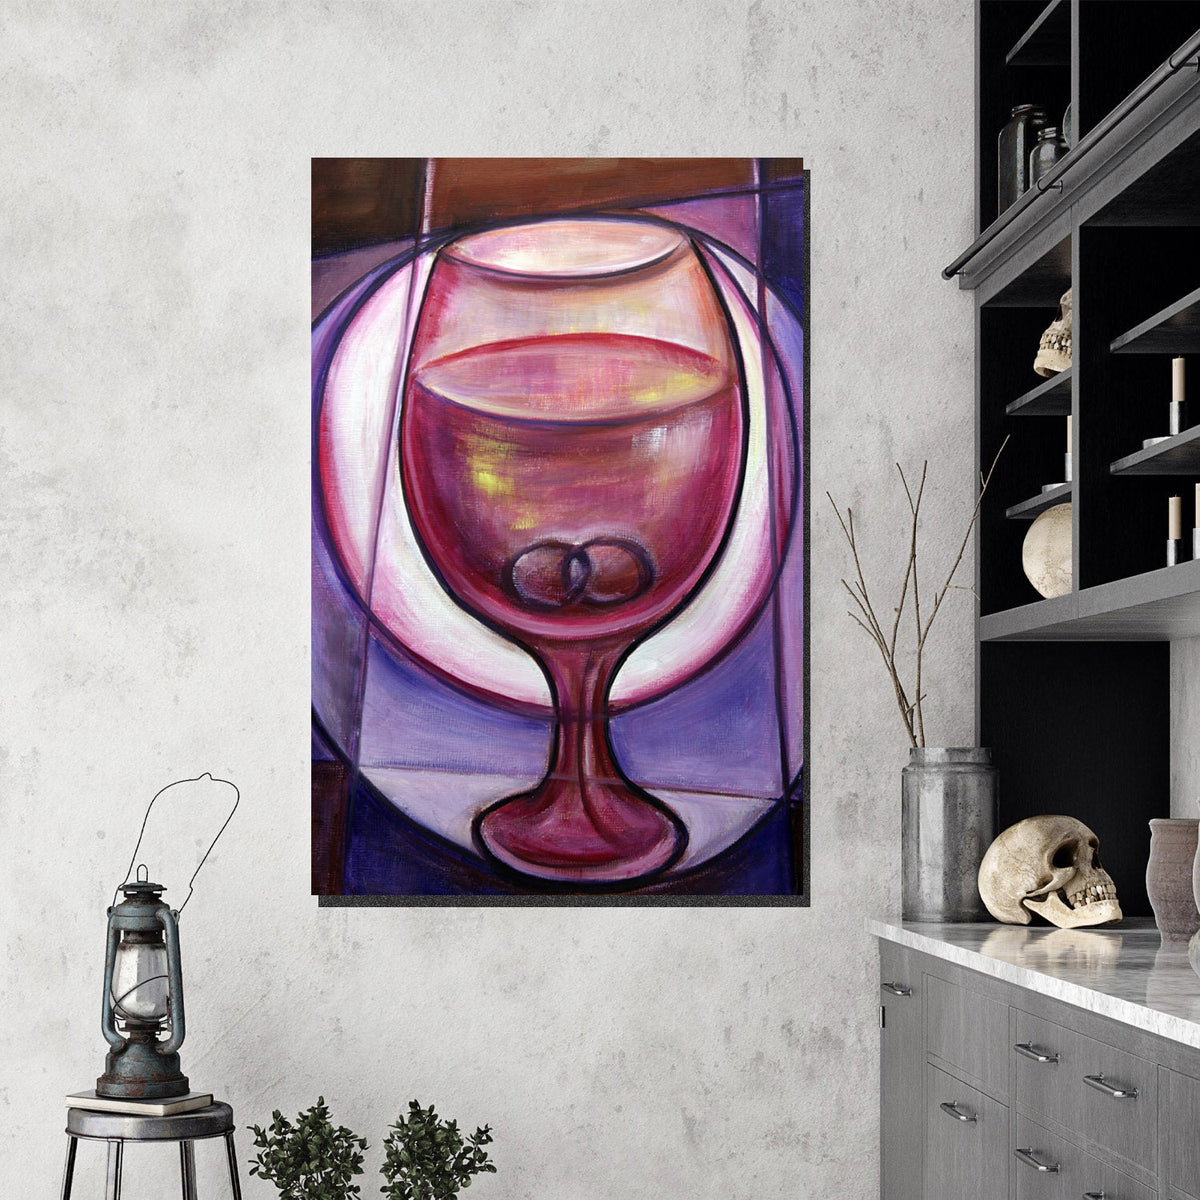 https://cdn.shopify.com/s/files/1/0387/9986/8044/products/WineglasswithtworingsCanvasArtPrintStretched-4.jpg